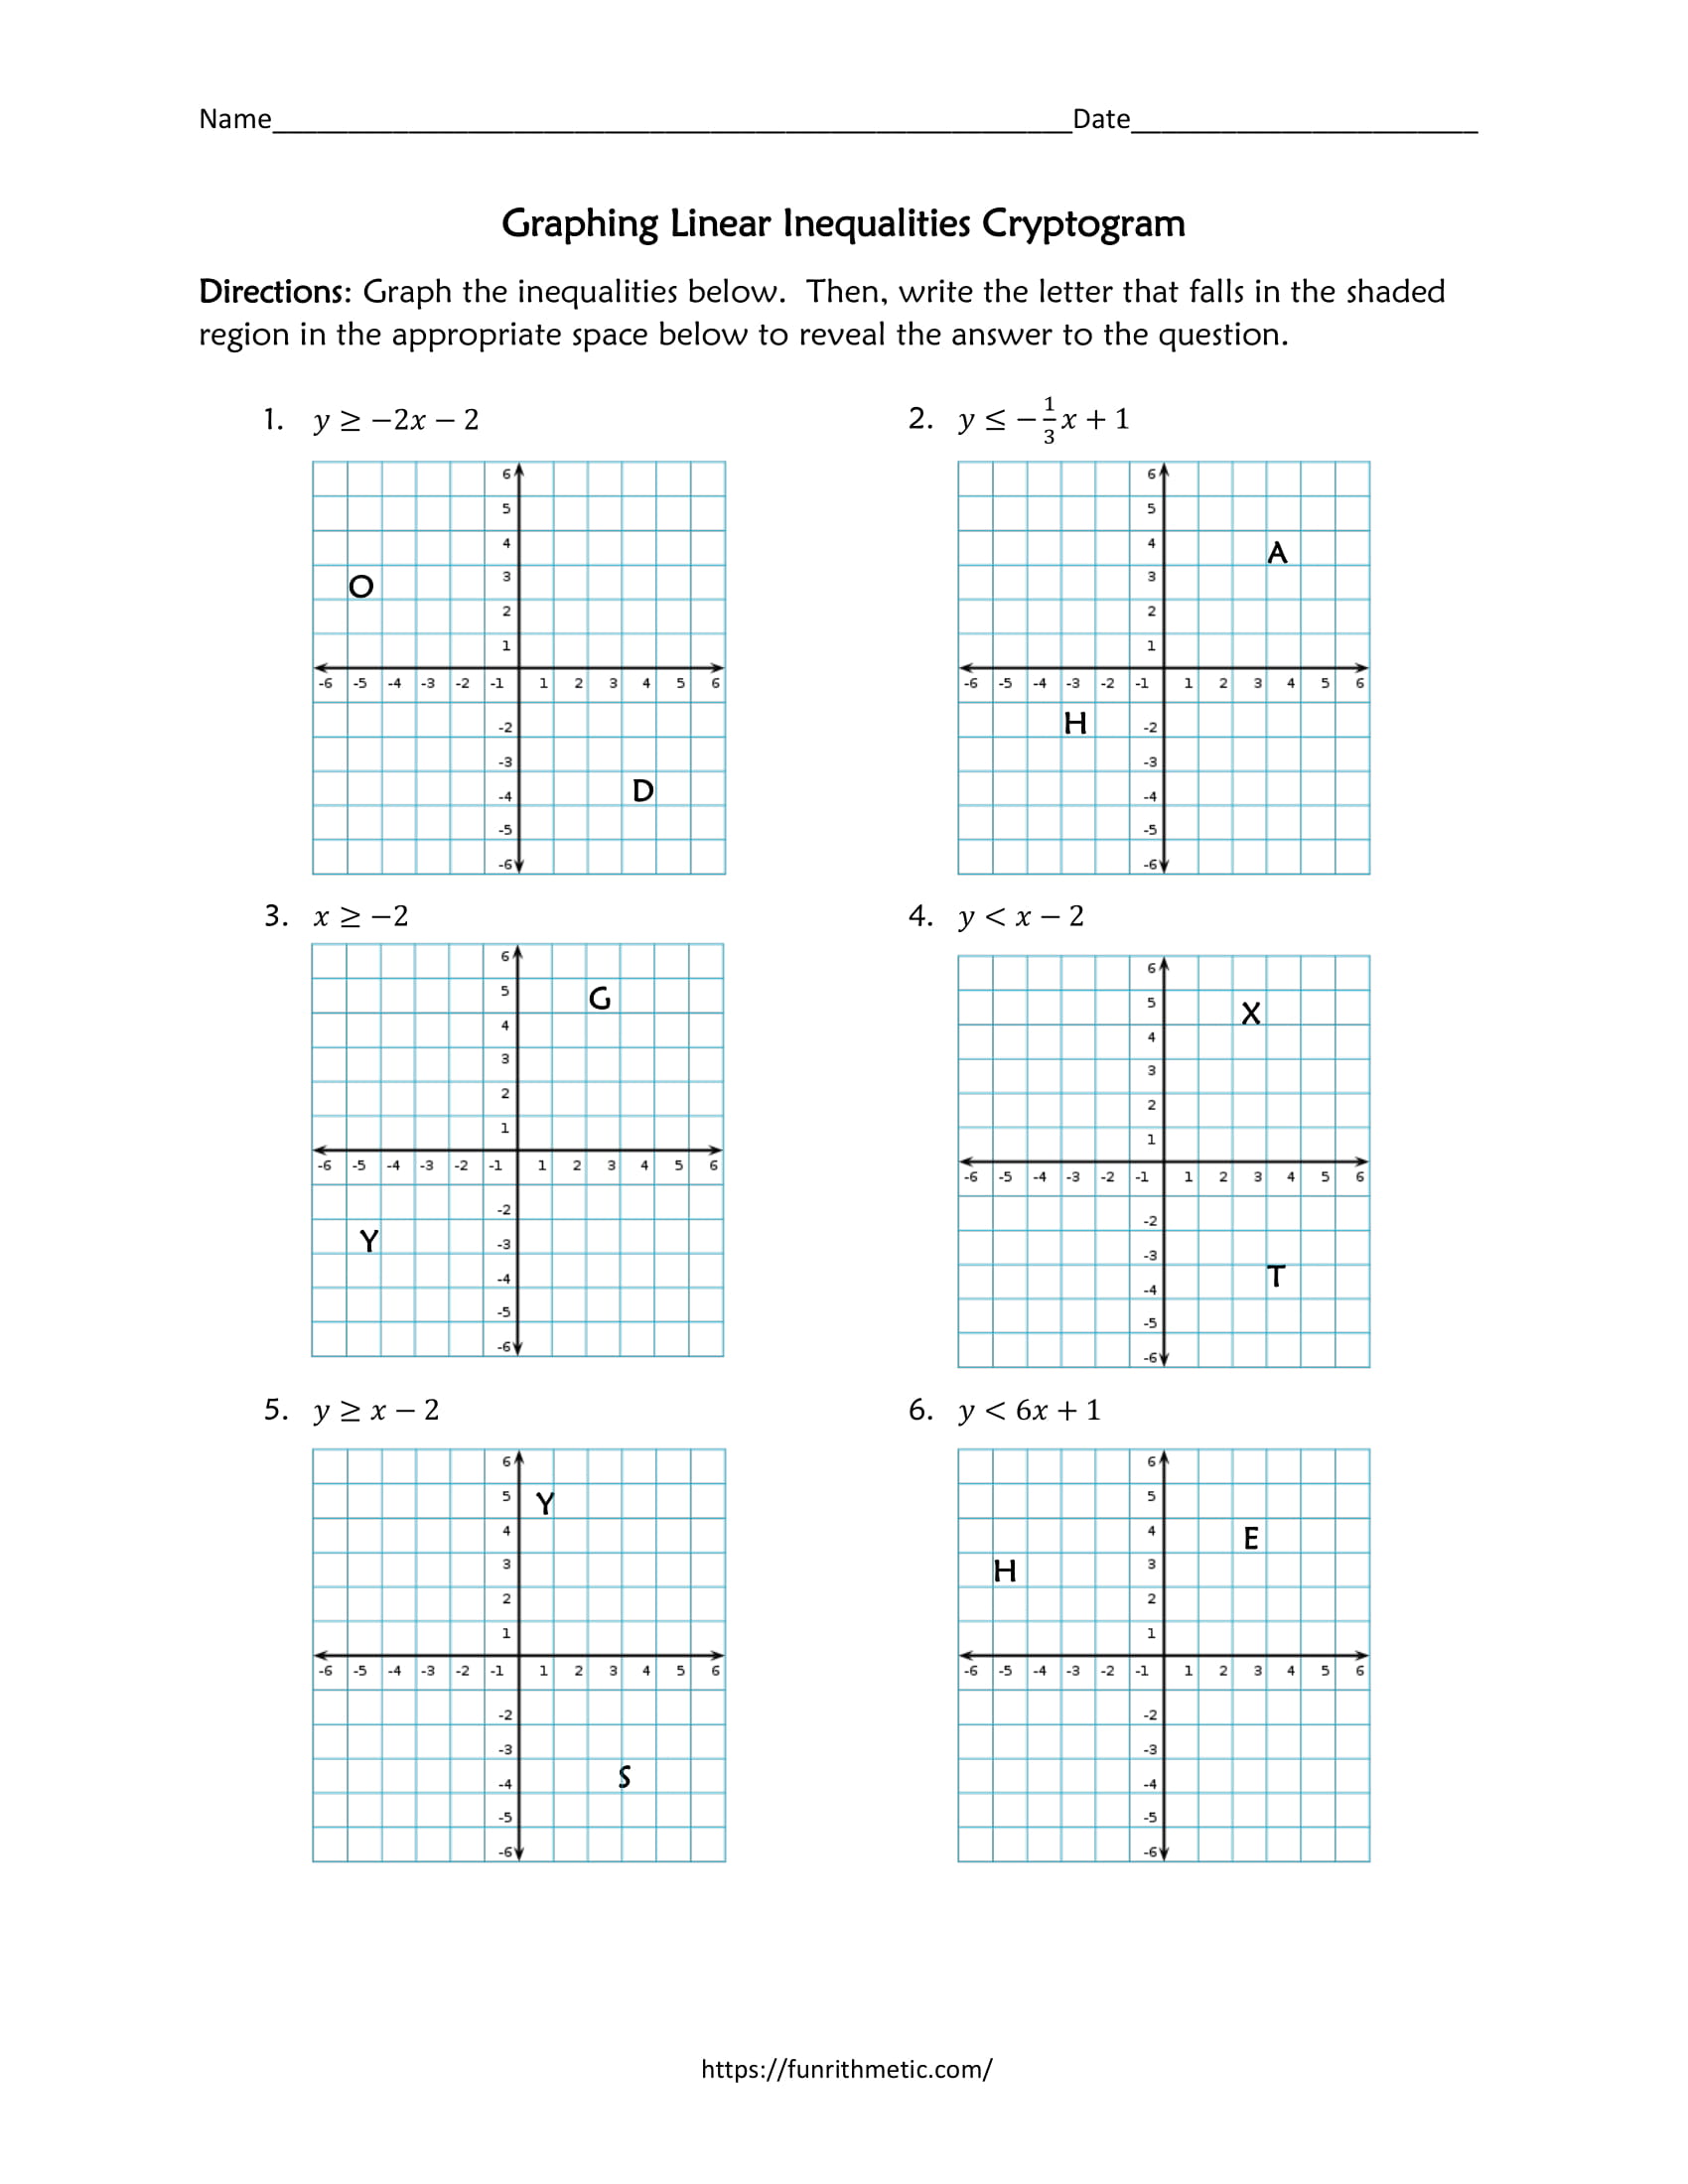 Graphing Linear Inequalities Cryptogram Worksheet Inside Graphing Linear Equations Worksheet Answers